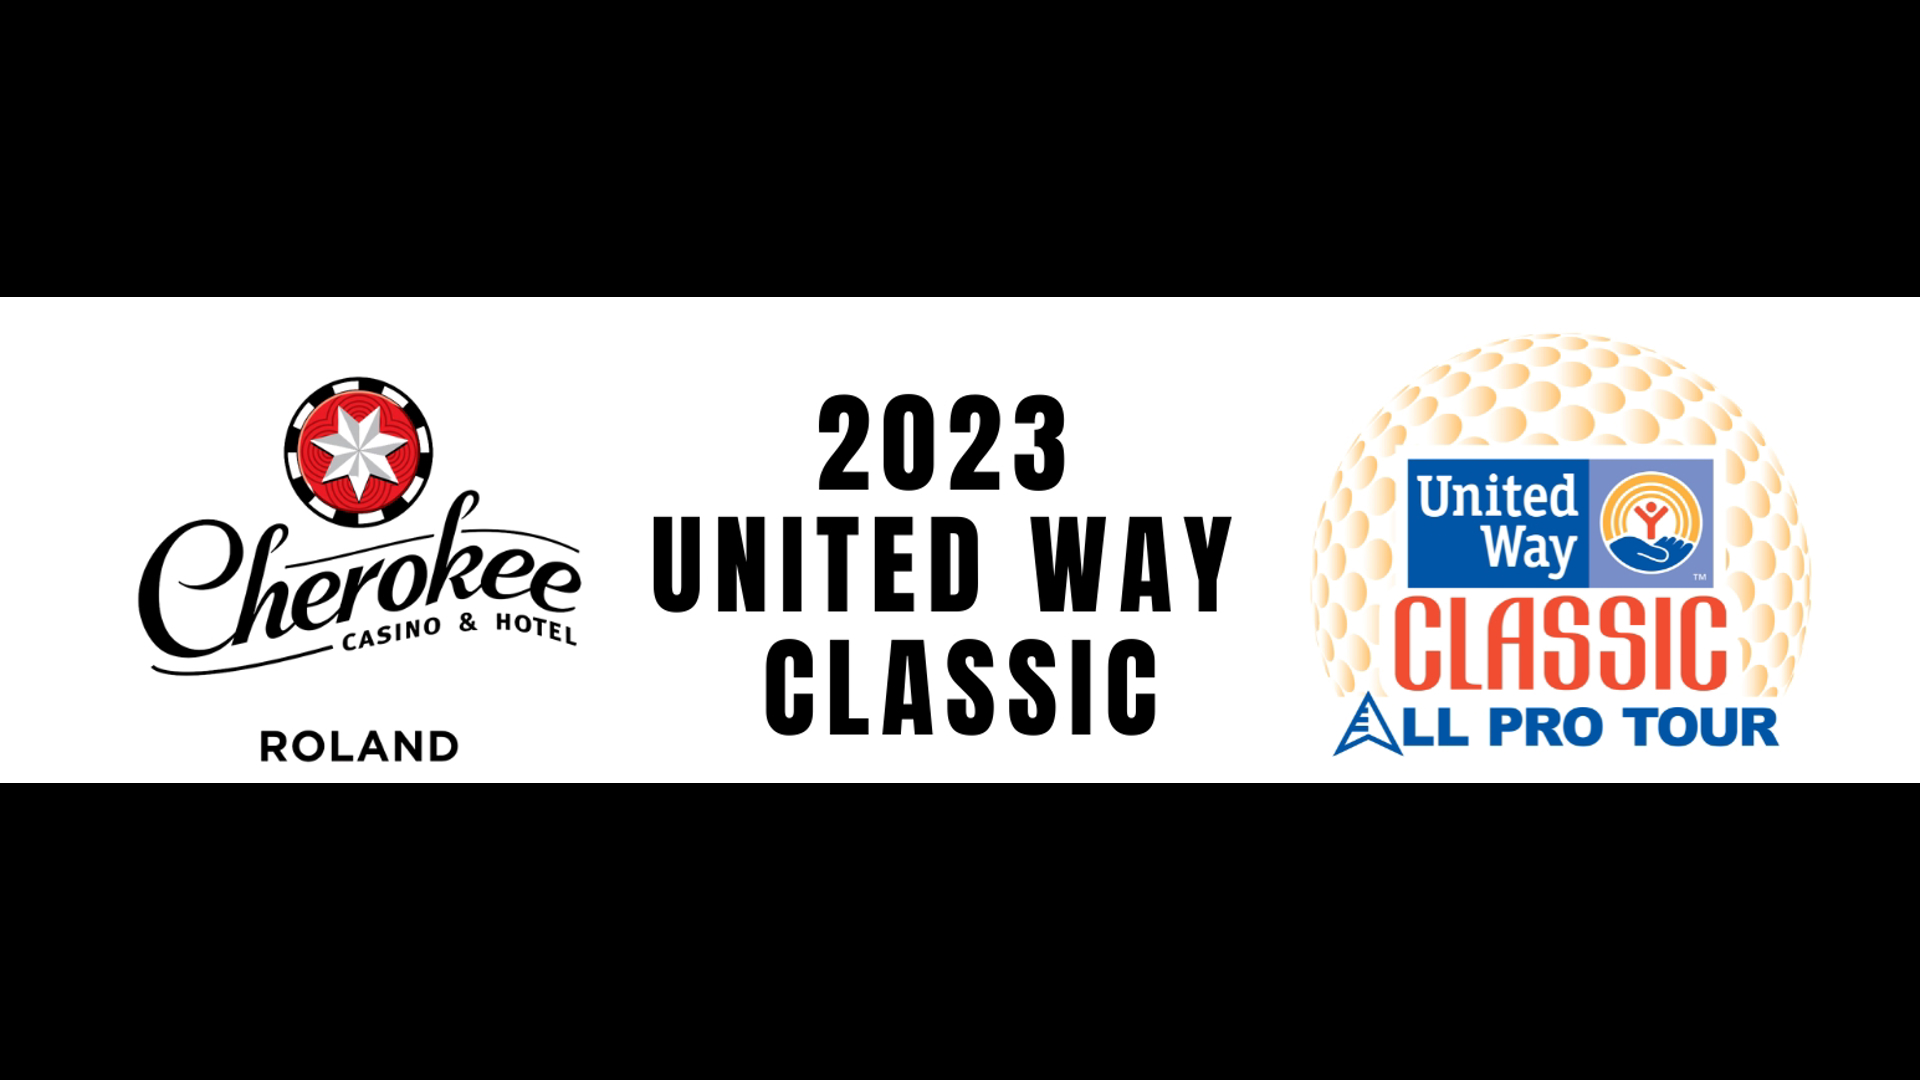 The All Pro Tour is returning to Hardscrabble Country Club in Fort Smith starting June 5th.  Daren finds out more from the United Way and its presenting sponsor.